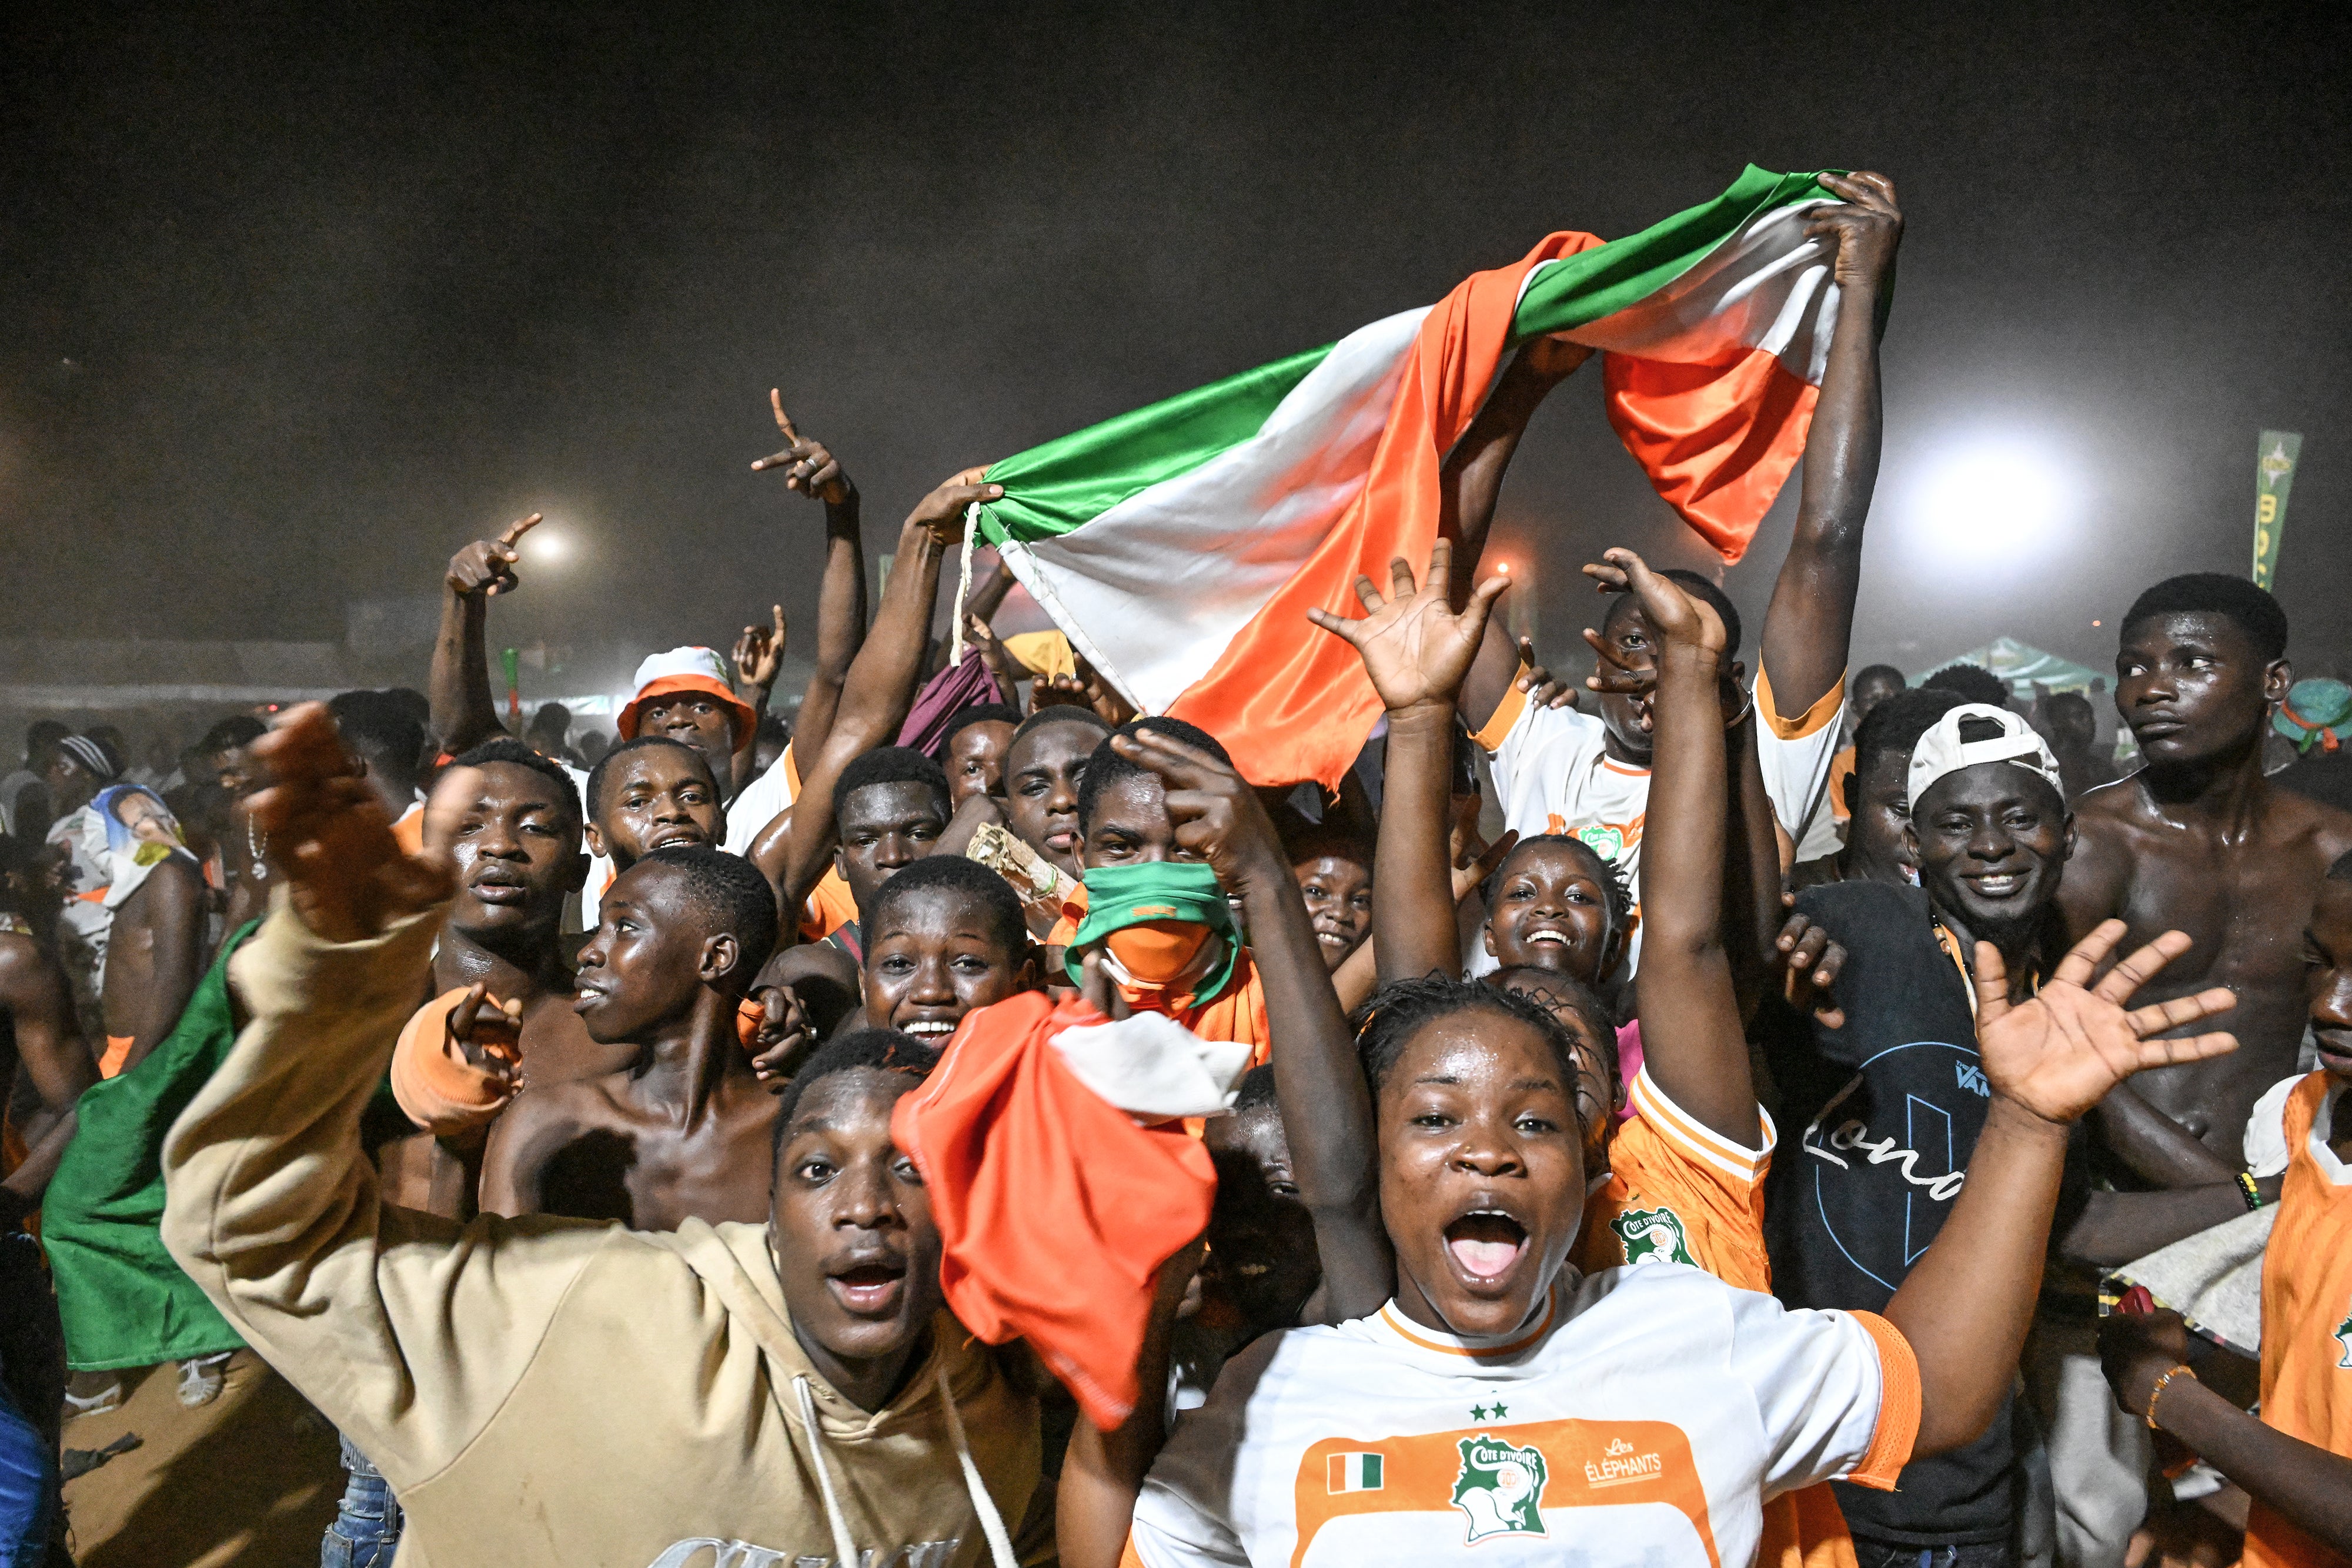 Ivorian fans celebrated wildly after the win